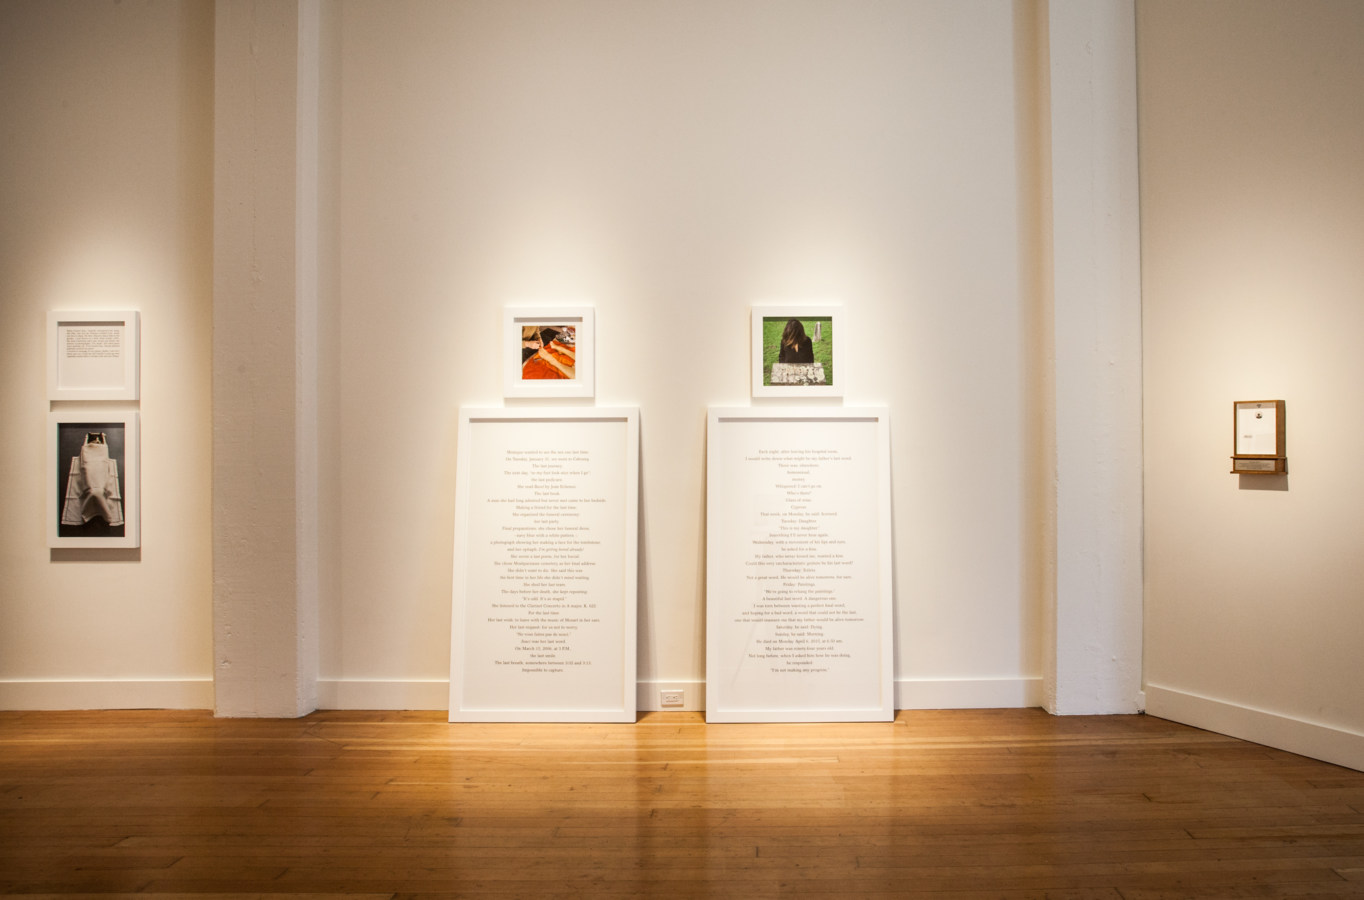 Color image of white walled gallery exhibiting framed photographs and text